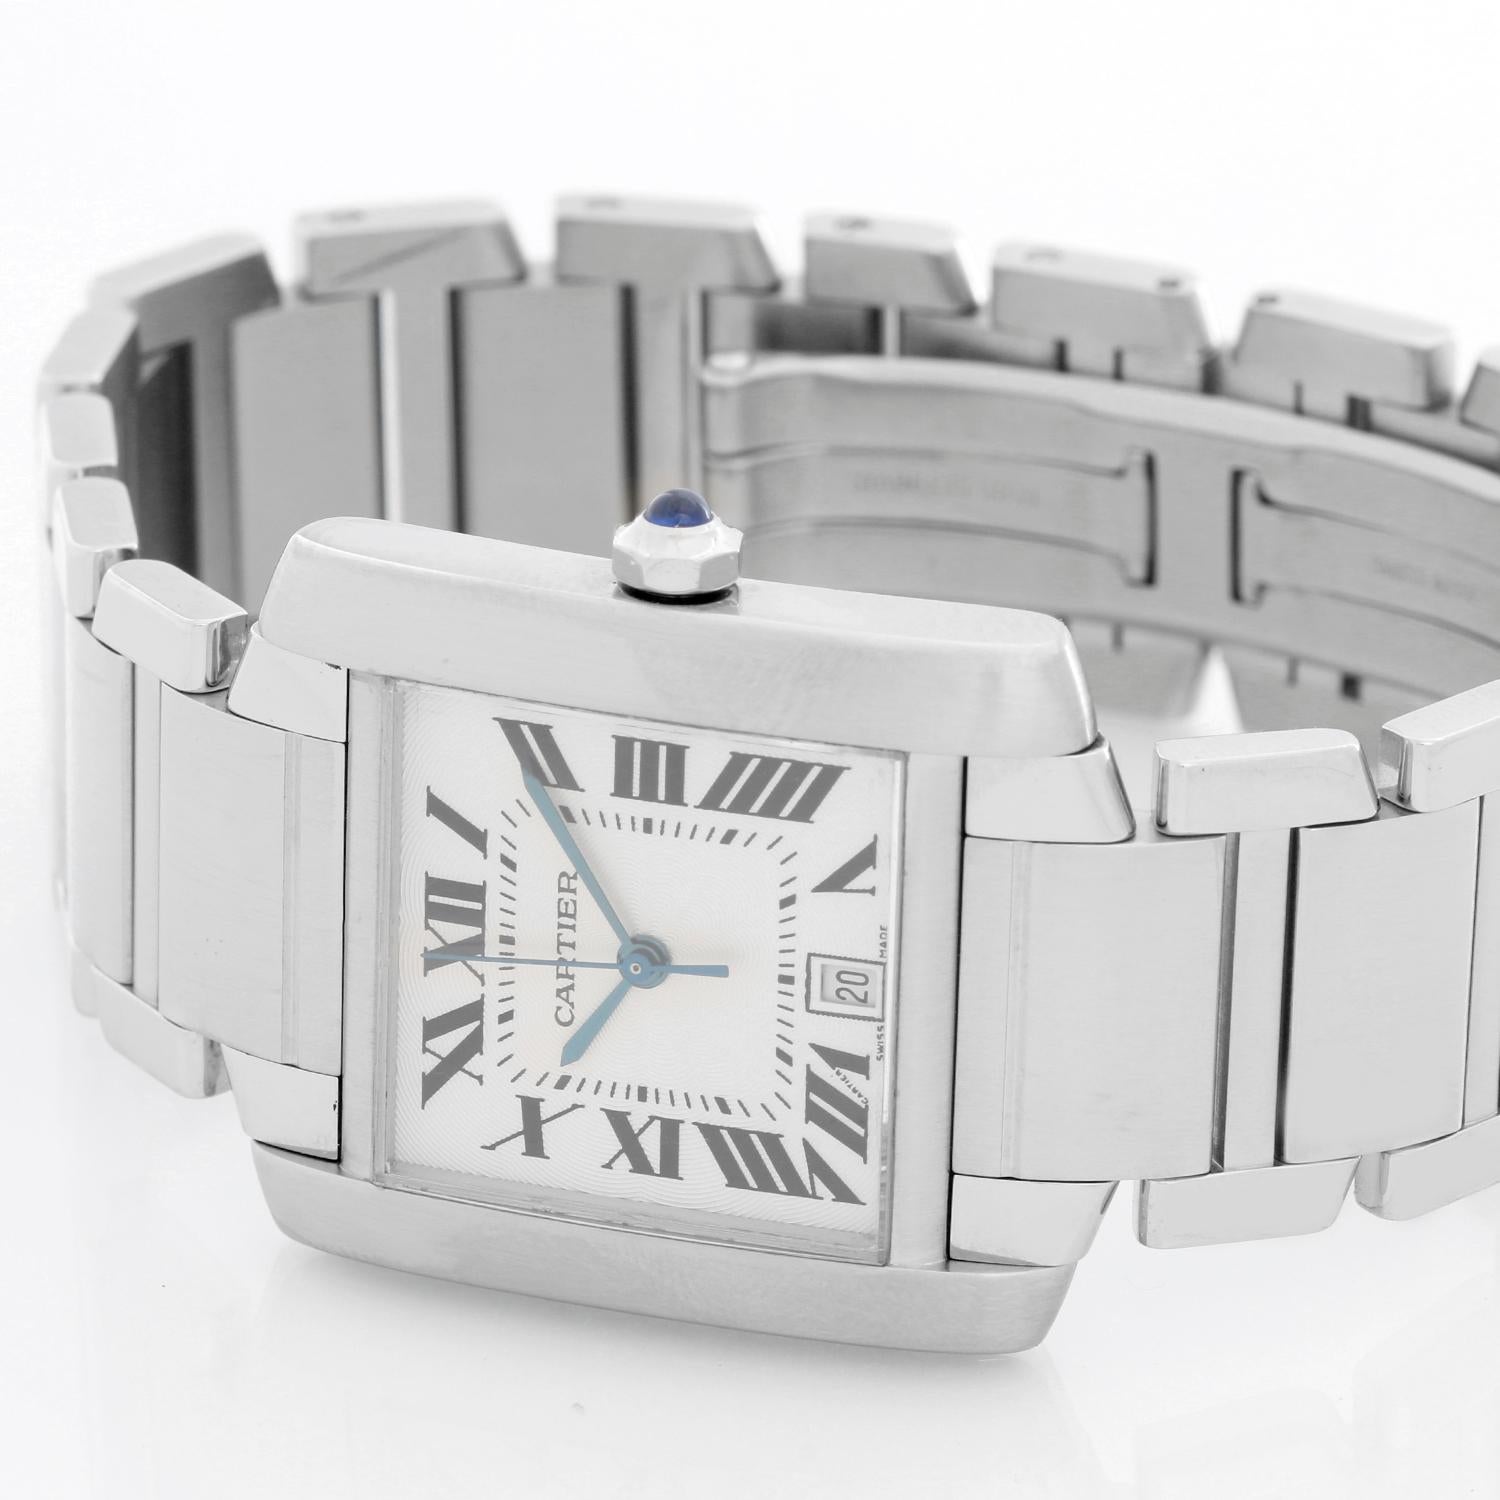 Cartier Stainless Steel  Tank Francaise Watch W51002Q3 - Quartz. Stainless Steel ( 28 x 35 mm ) ; date at 6 o'clock. Silver Guilloche dial with Roman numerals. Stainless steel Cartier bracelet. Pre-owned with custom box .